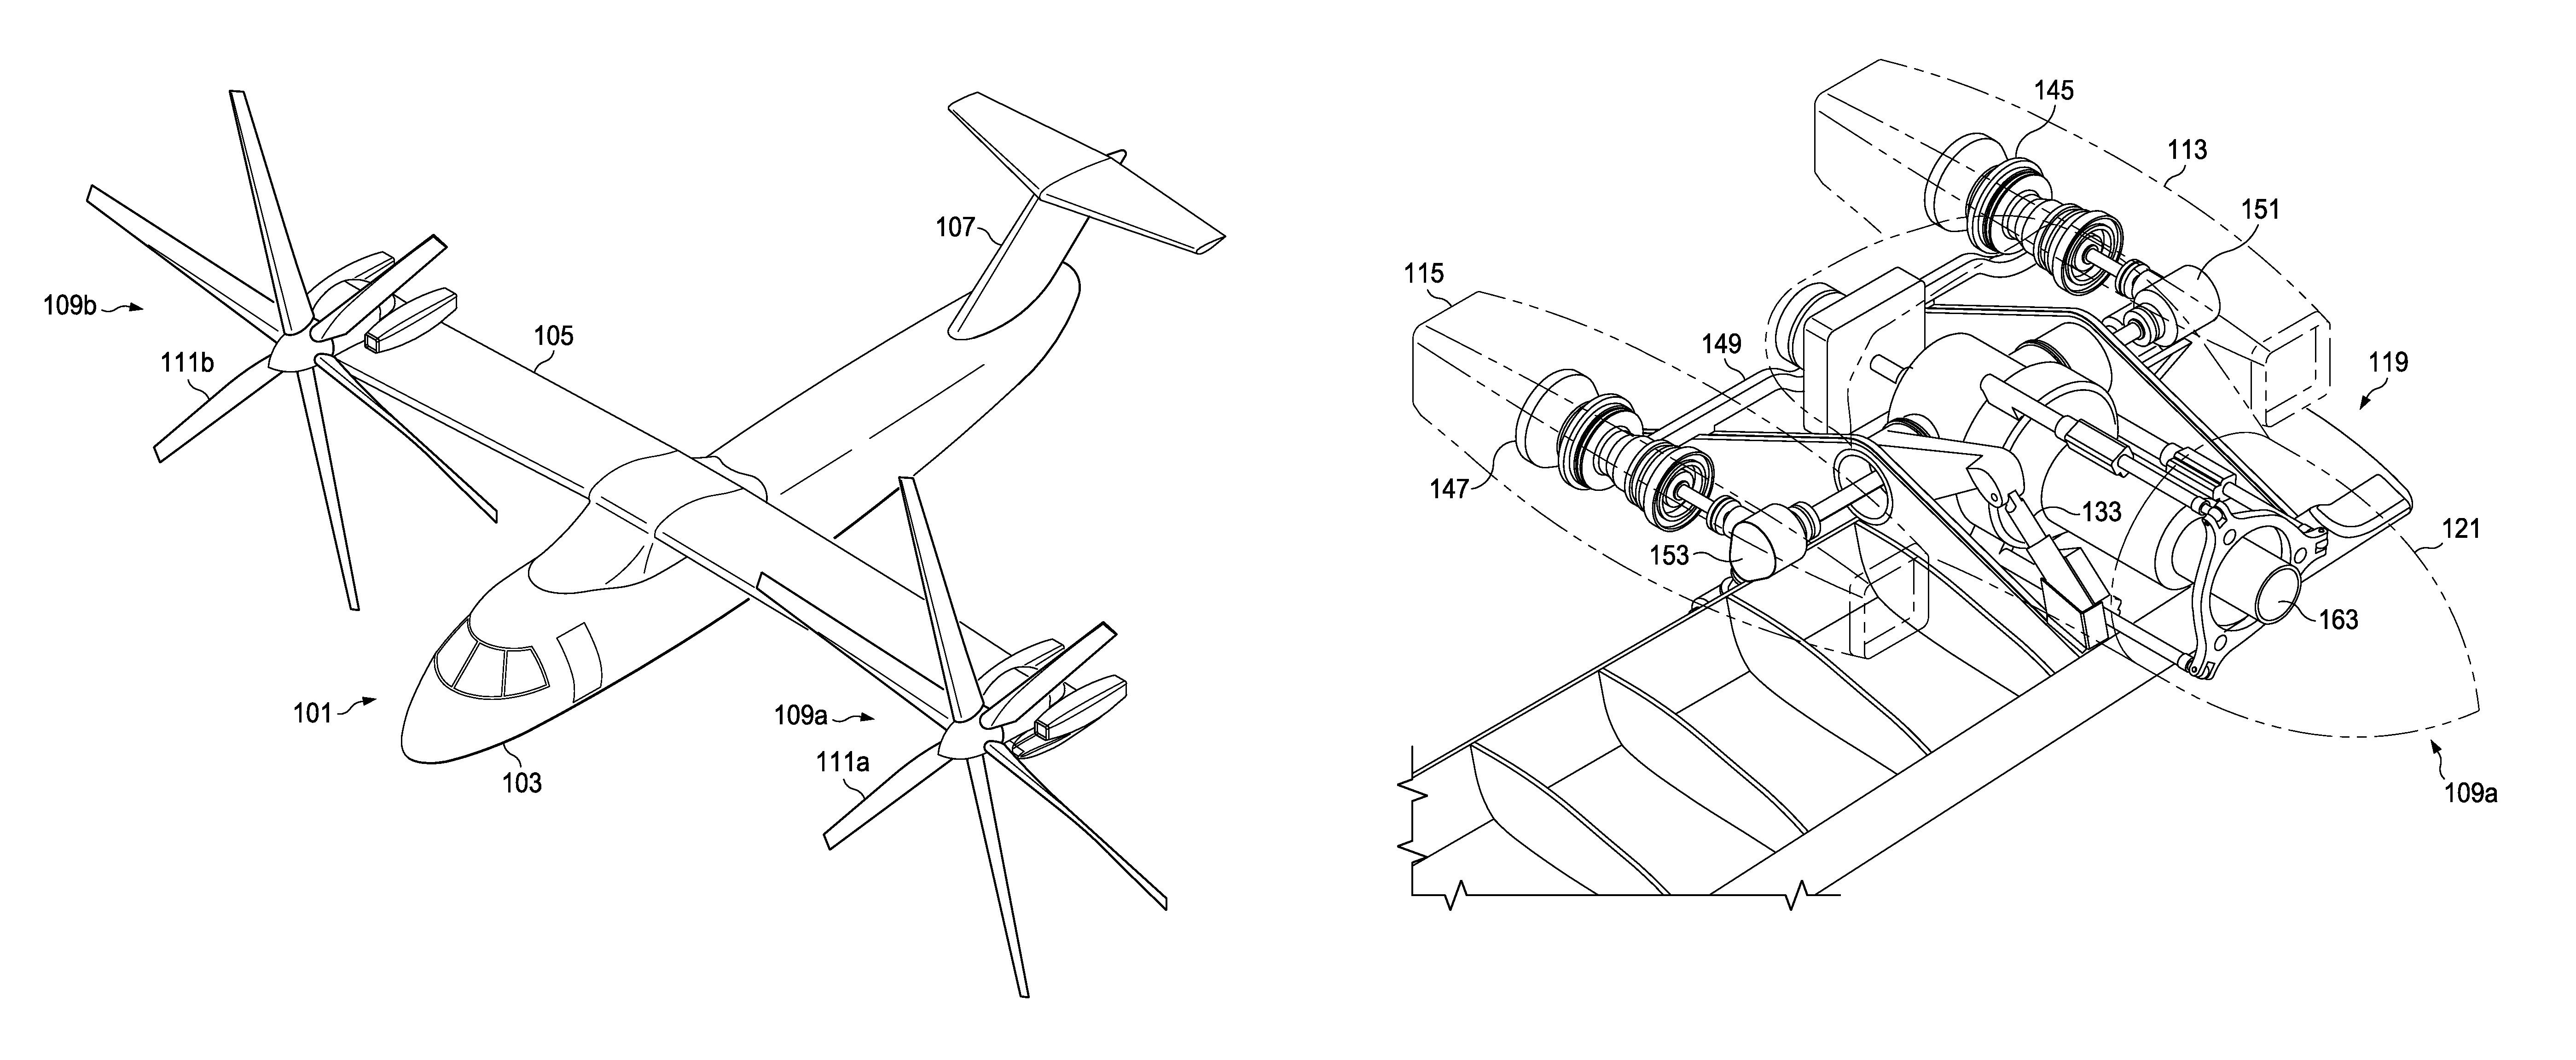 Tilt rotor aircraft with fixed engine arrangement